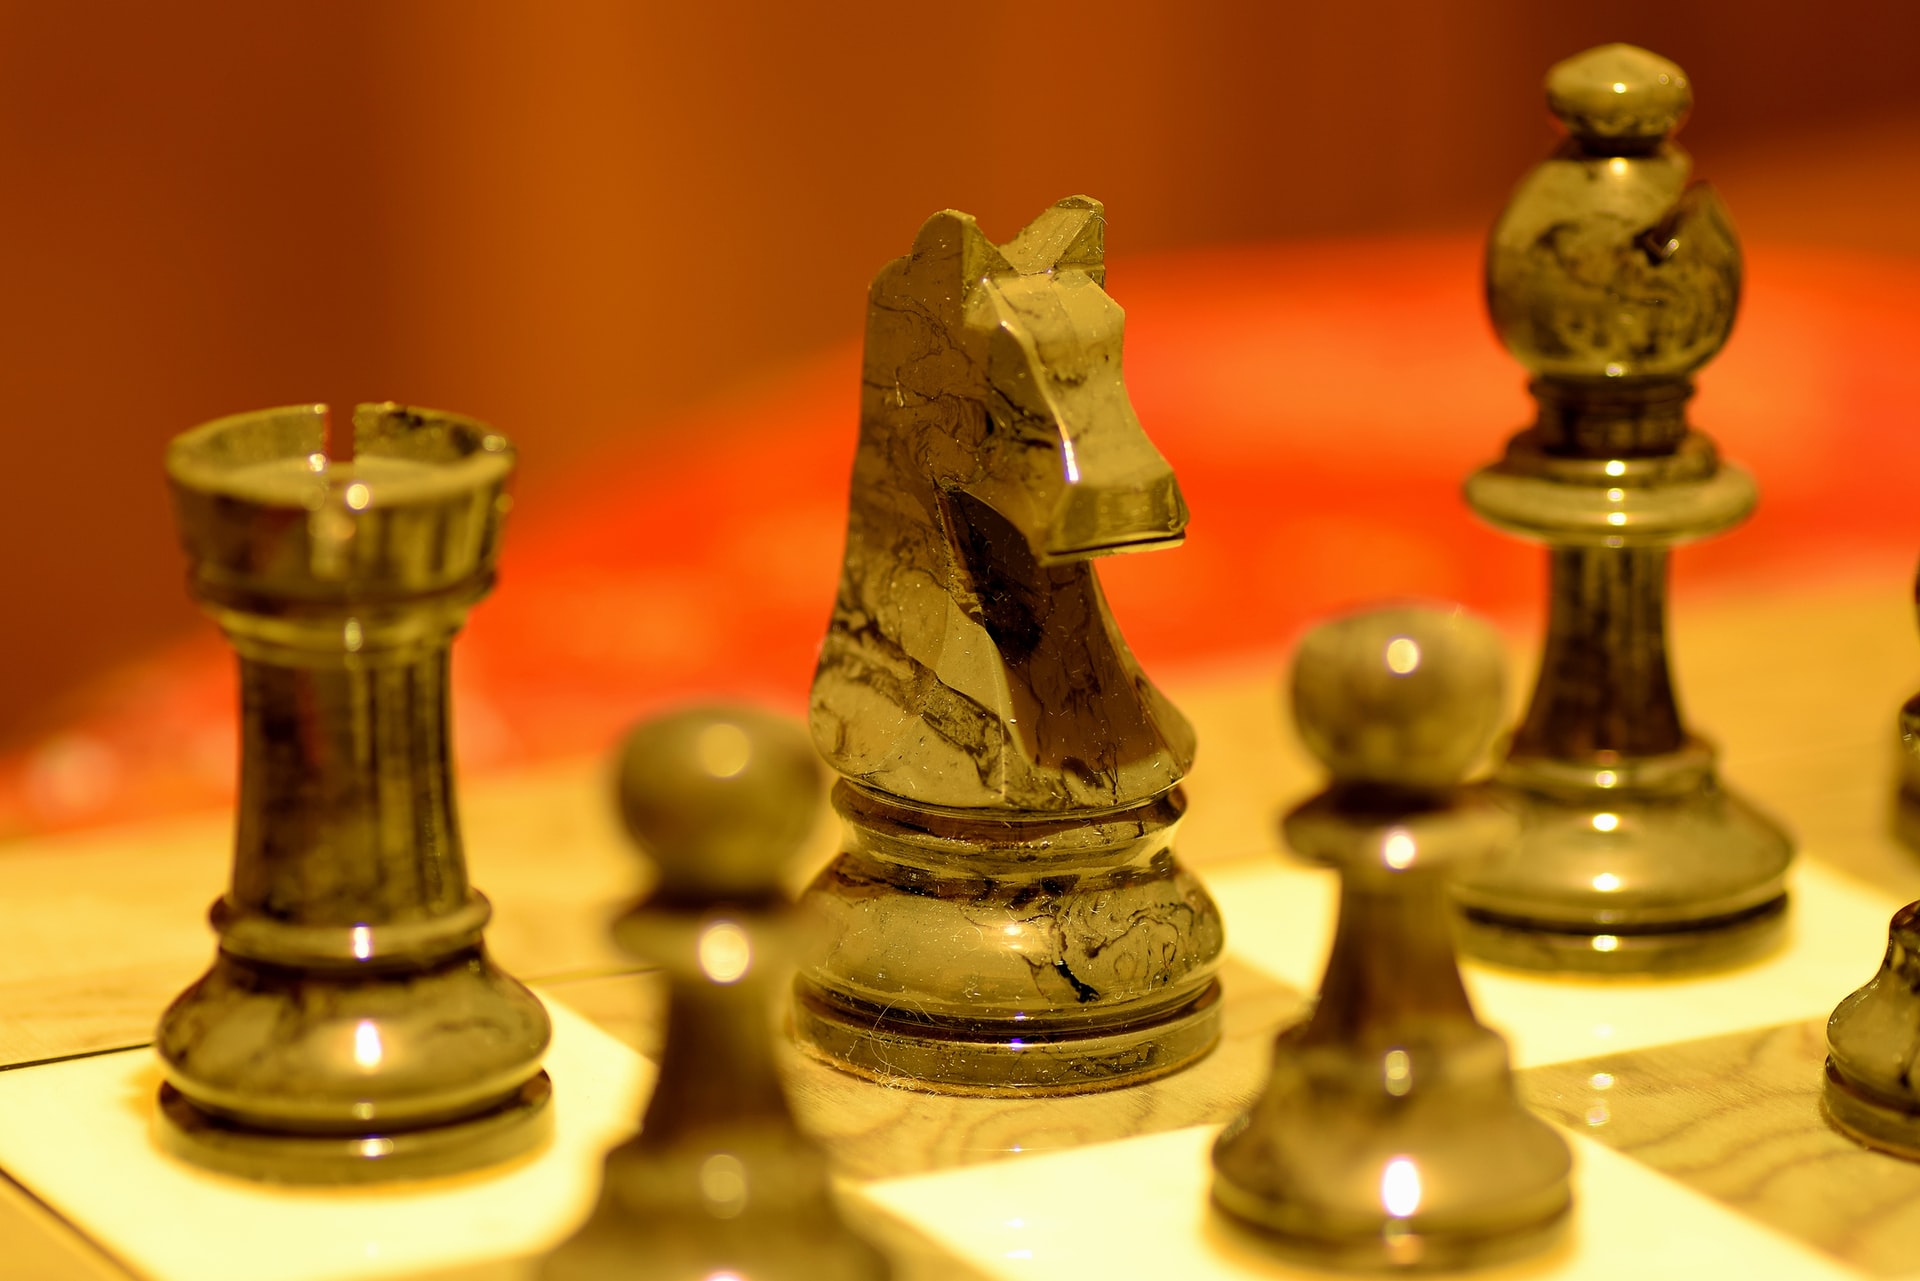 5 Facts About Chess Pieces You Didn’t Know